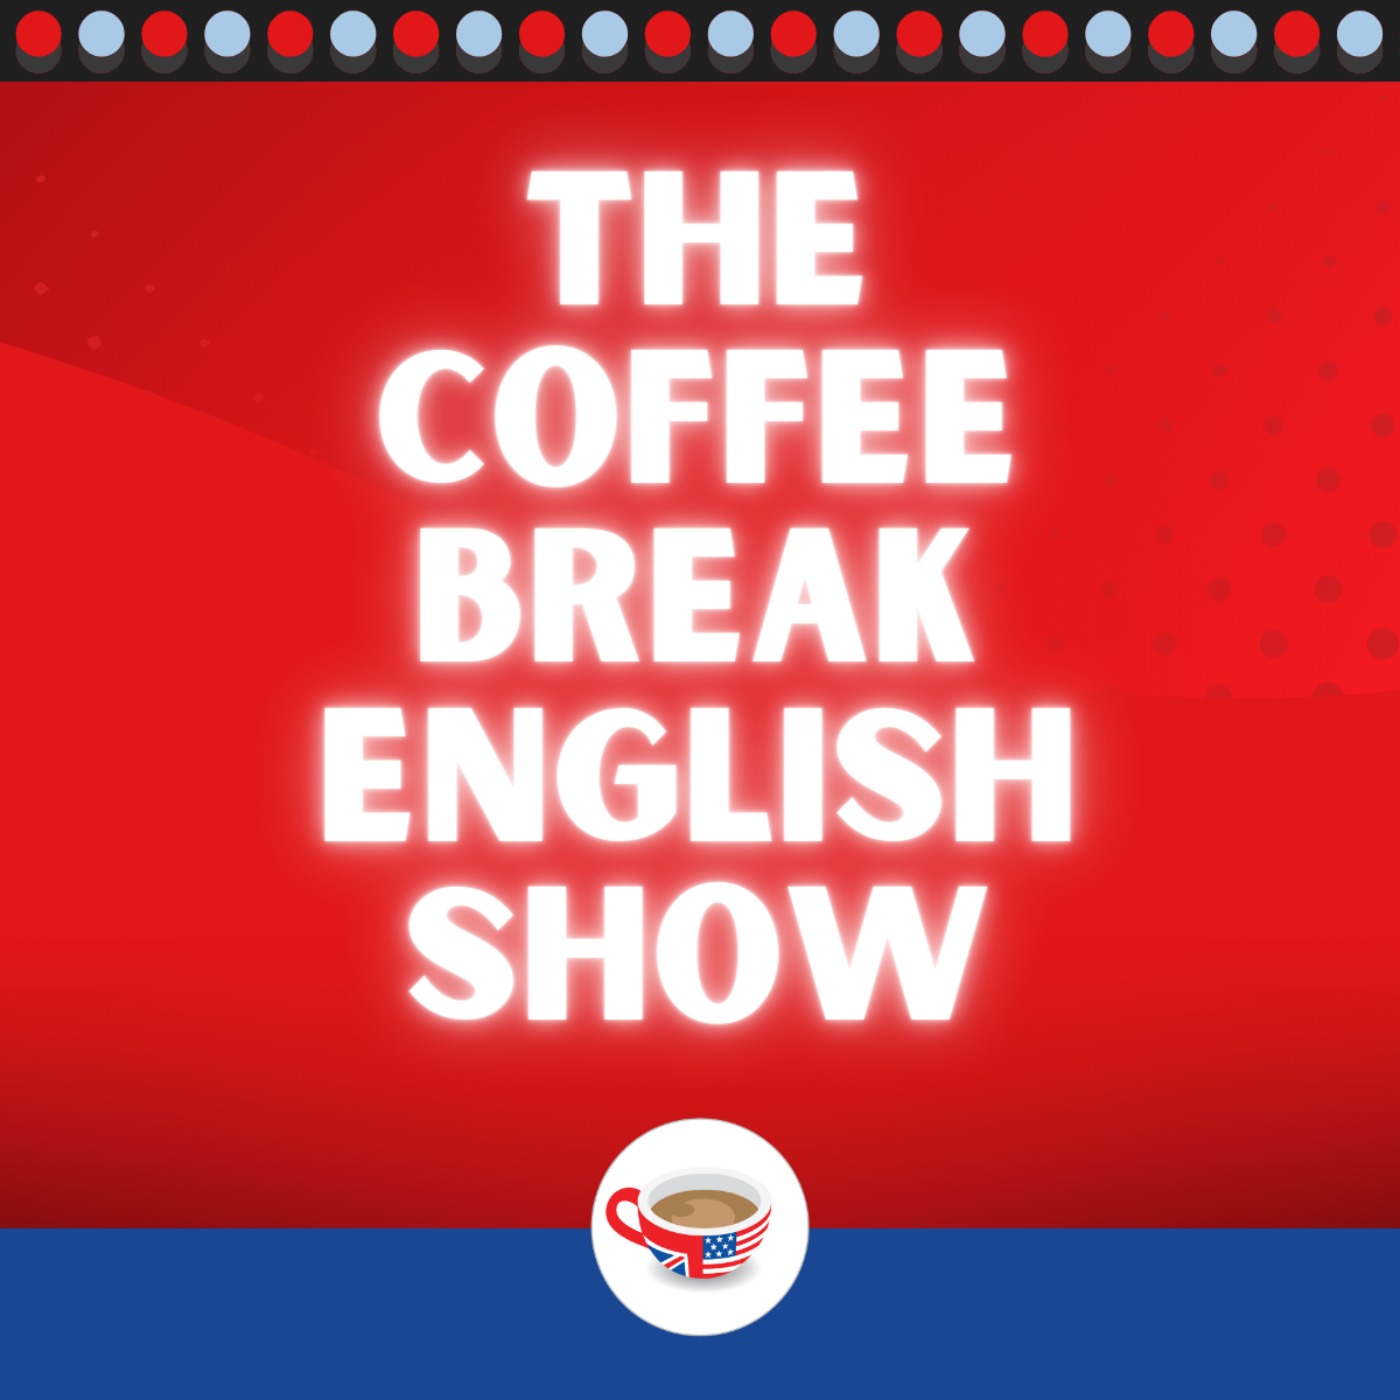 How to pronounce ’Tuesday’ and ’Thursday’ | The Coffee Break English Show 1.09